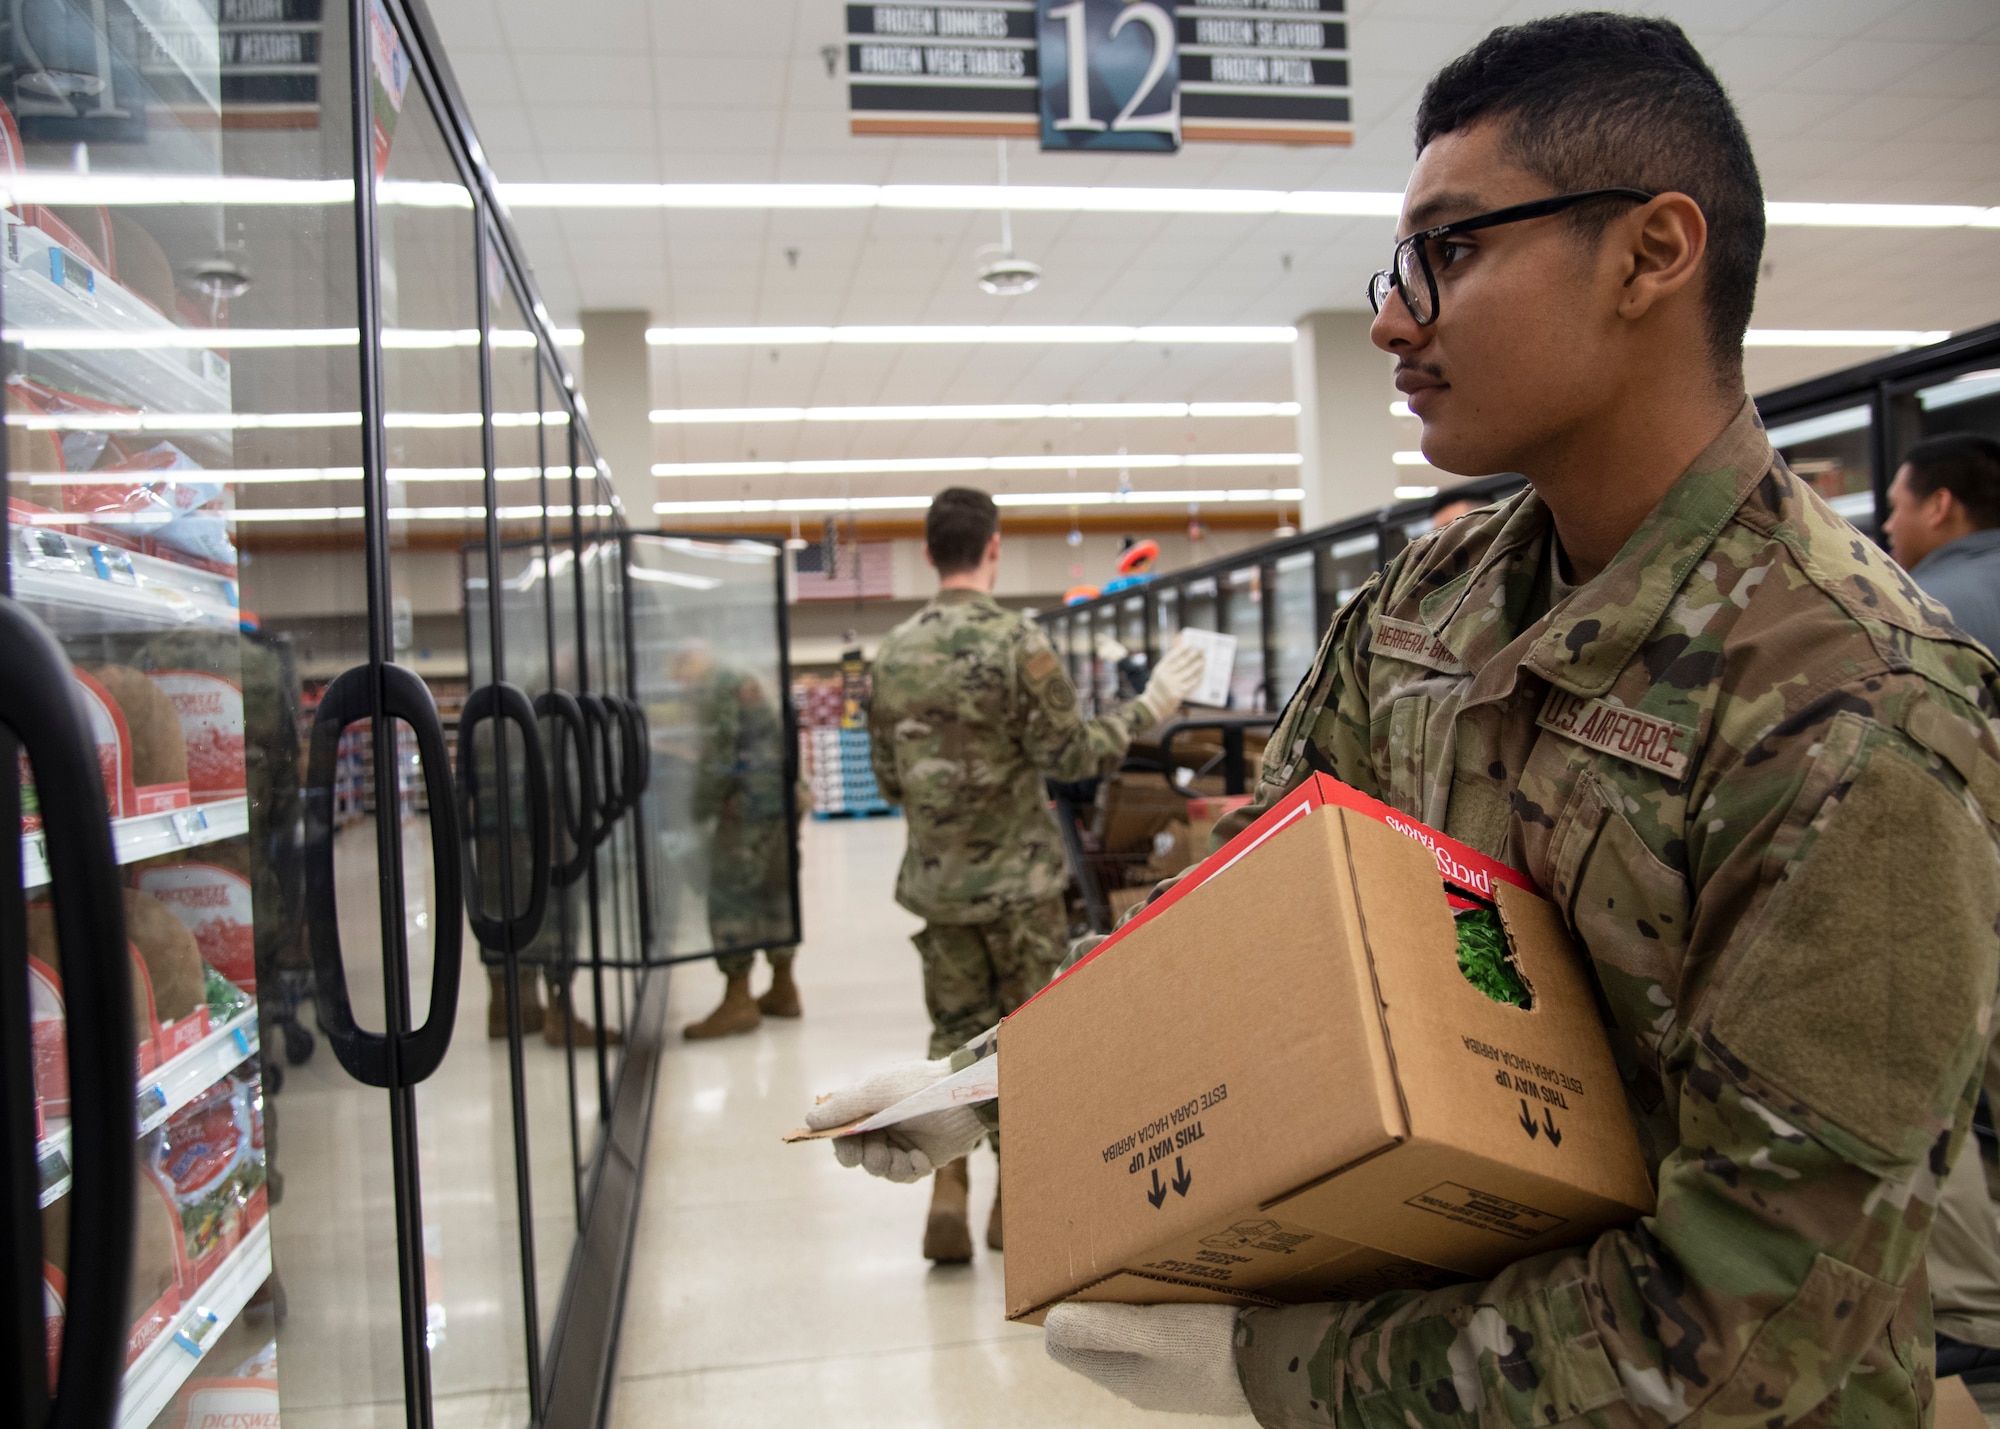 Airman Michael Herrera-Bradford, 362nd Training Squadron crew chief apprentice course students, helps stock shelves at Sheppard Air Force Base, Texas, April 2, 2020. On March 25, 2020 all Department of Defense commissaries and other facilities were deemed mission essential. To help out those who work the hardest to supply the base, these Airmen in Training were sent from their squadrons to help with what they could. (U.S. Air Force photo by Senior Airman Pedro Tenorio)